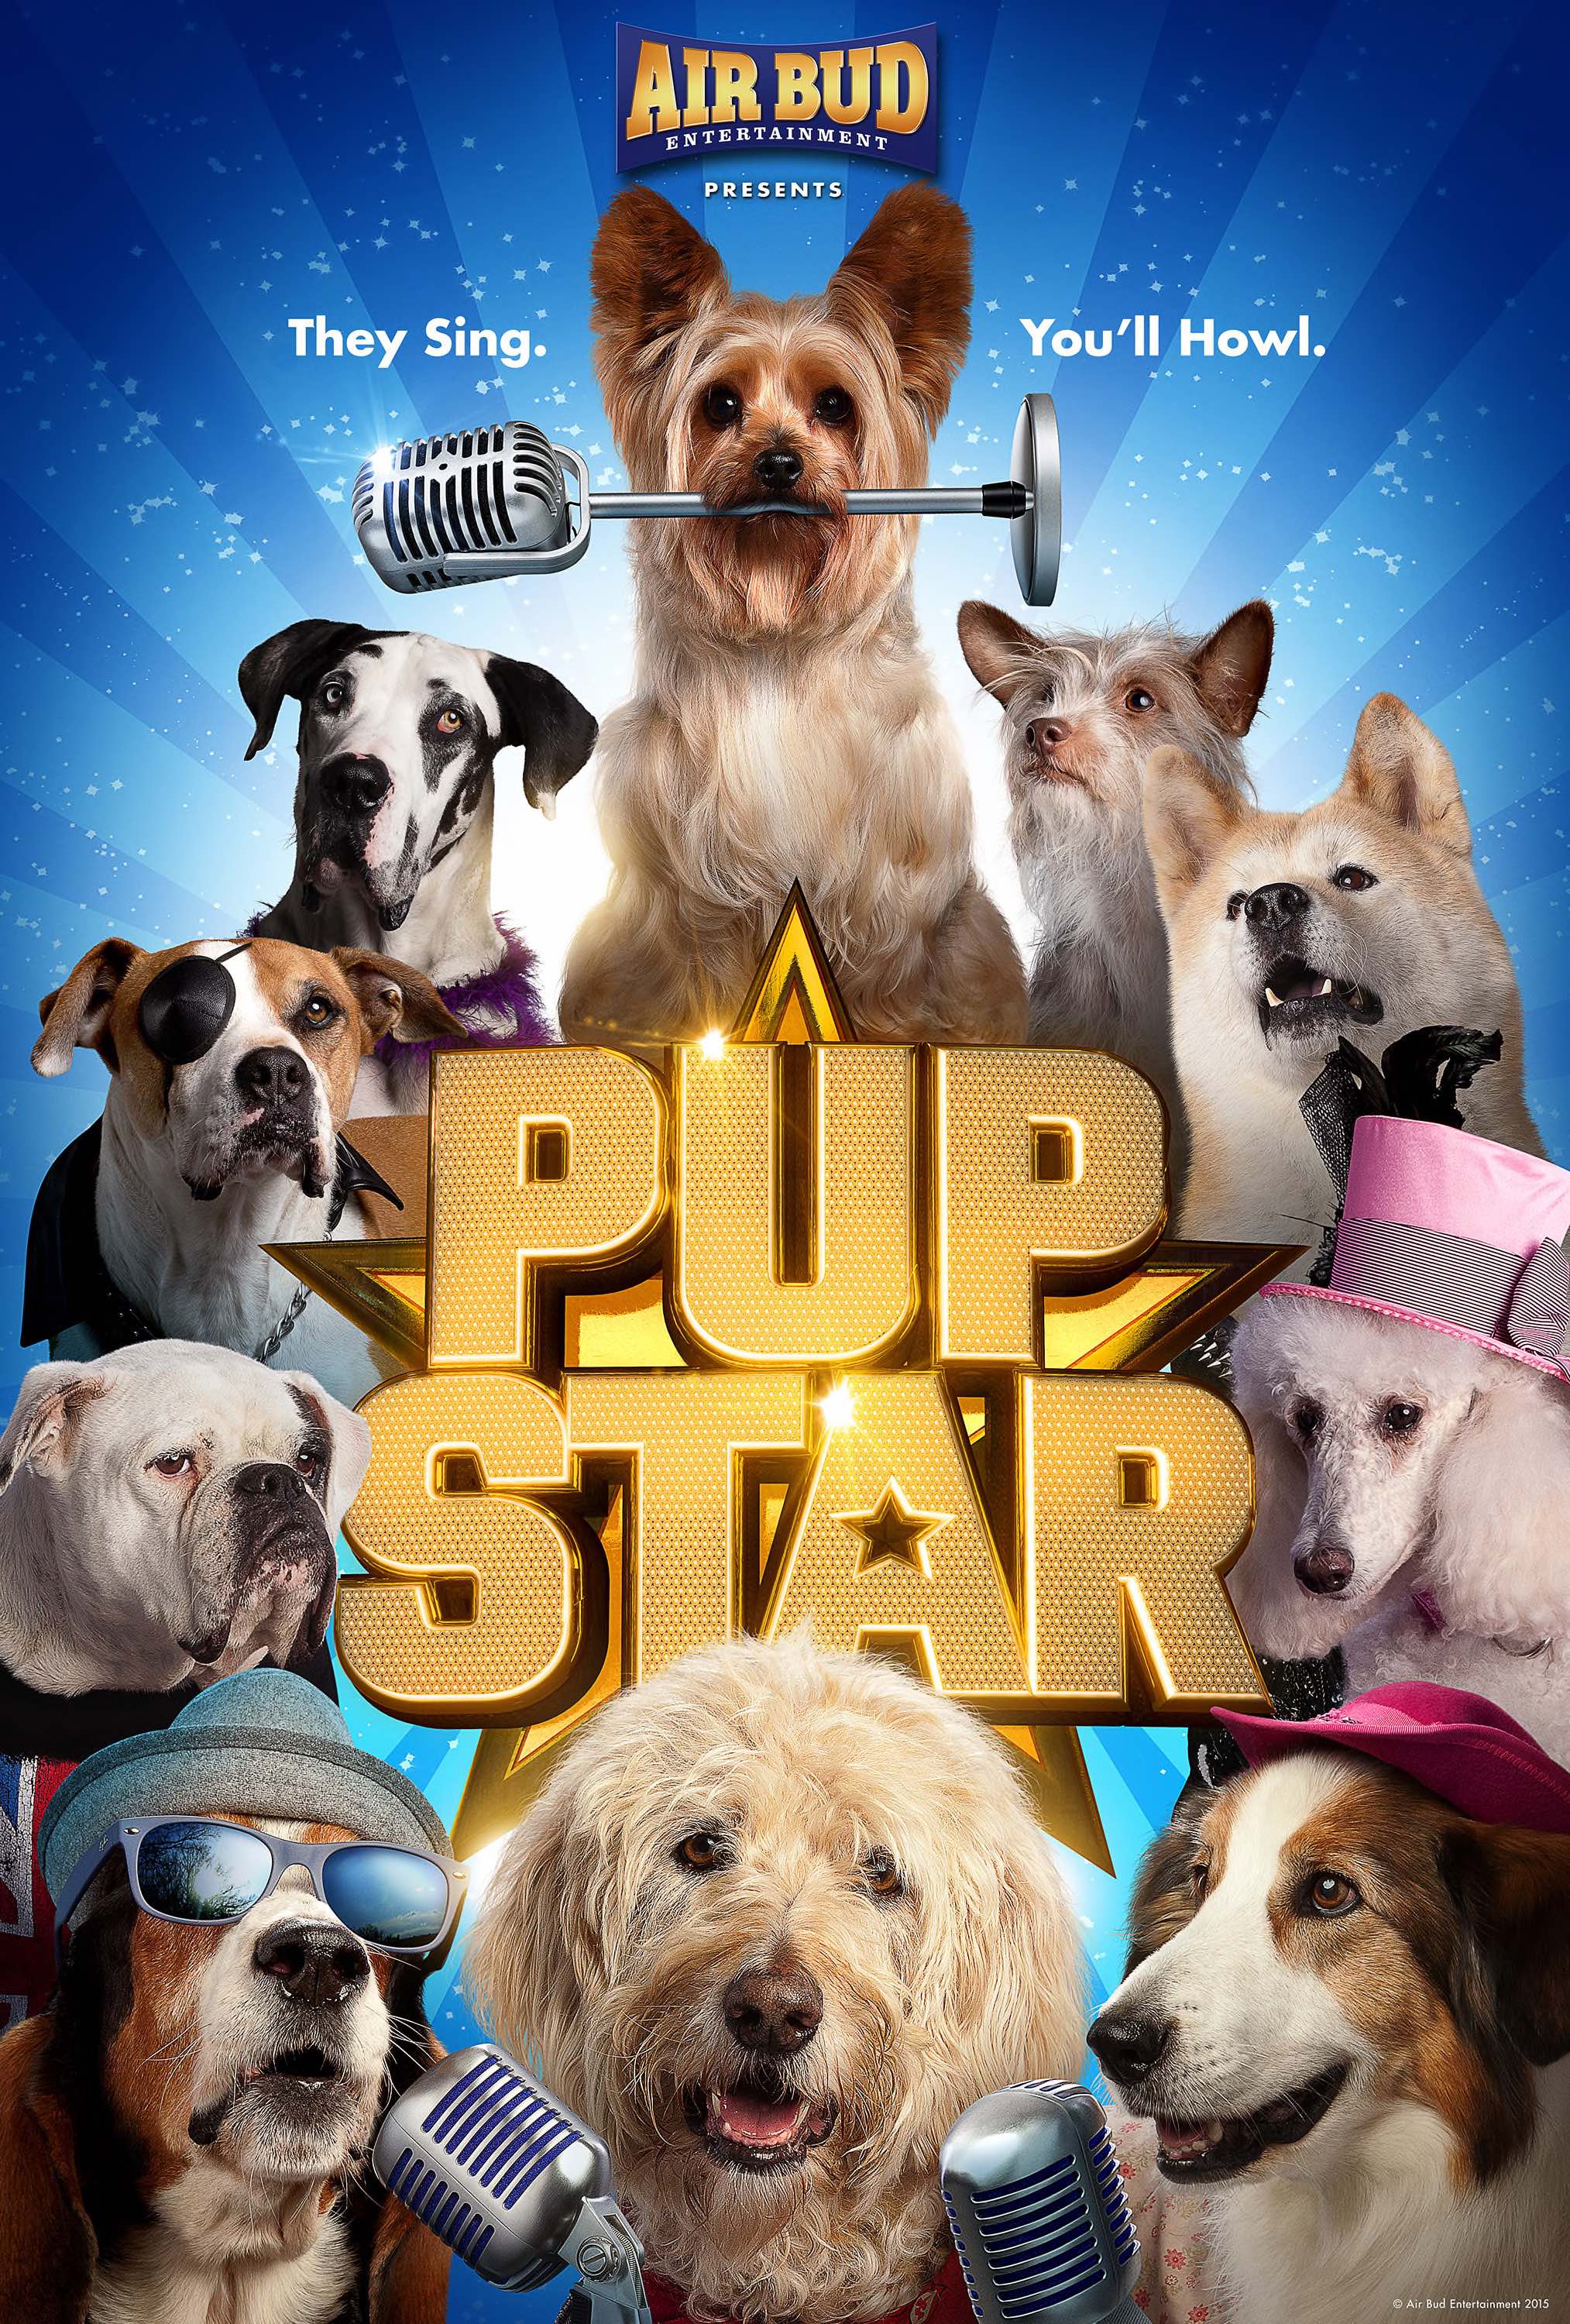 AIR BUD ENTERTAINMENT Announces the Broadcast Premiere of 'PUP STAR